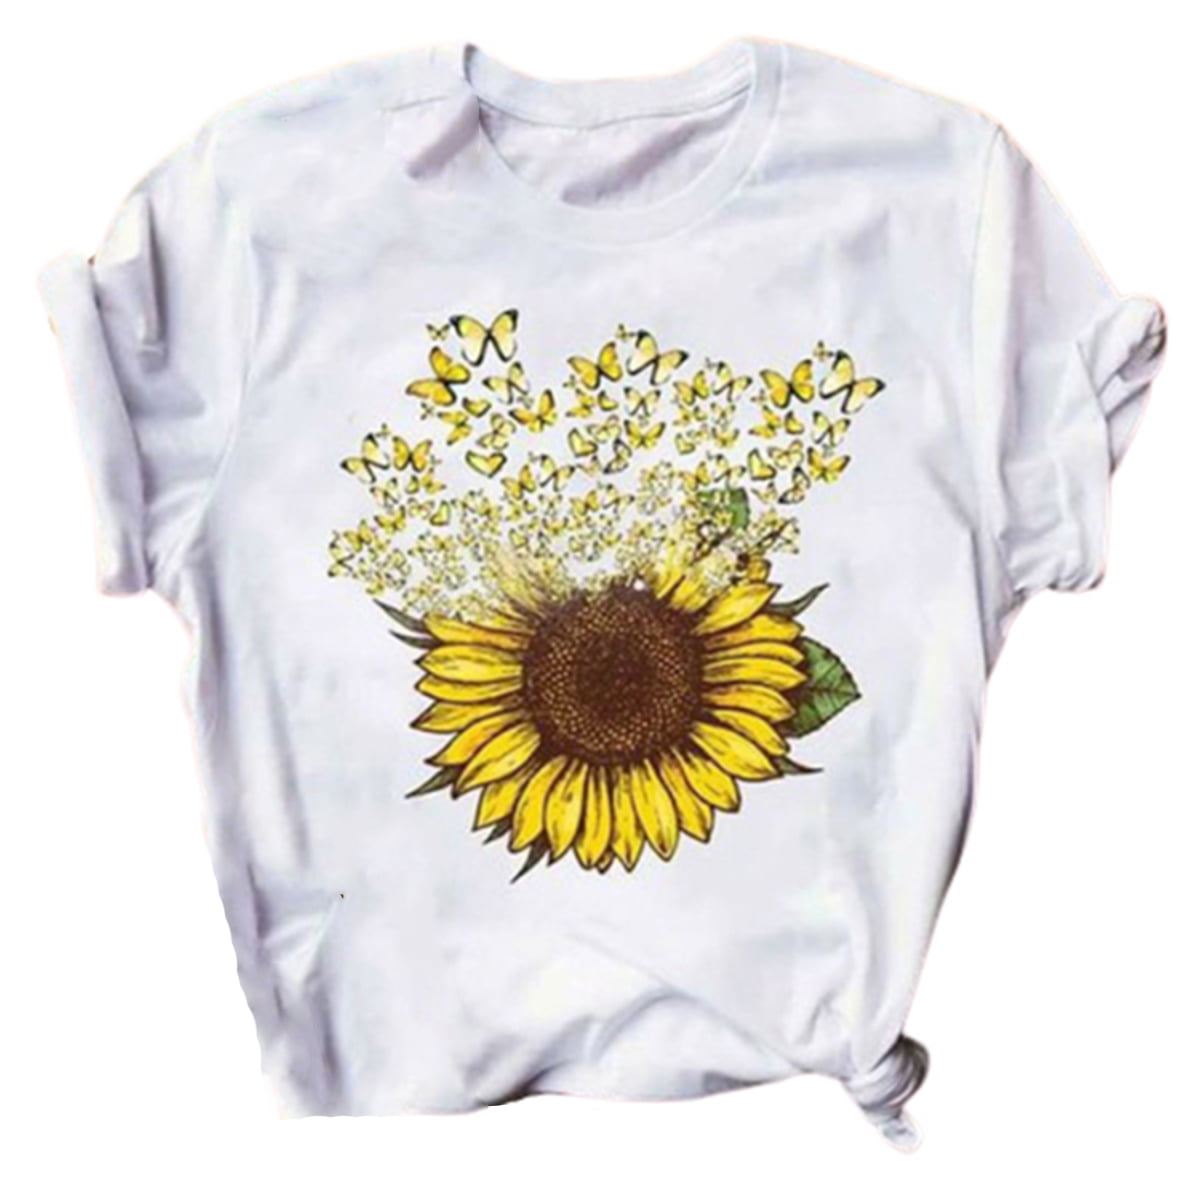 Womens Solid Color Short Sleeve Letter Sunflower Butterfly Graphic Casual Tops Tees Pullover T Shirt for Teen Girls